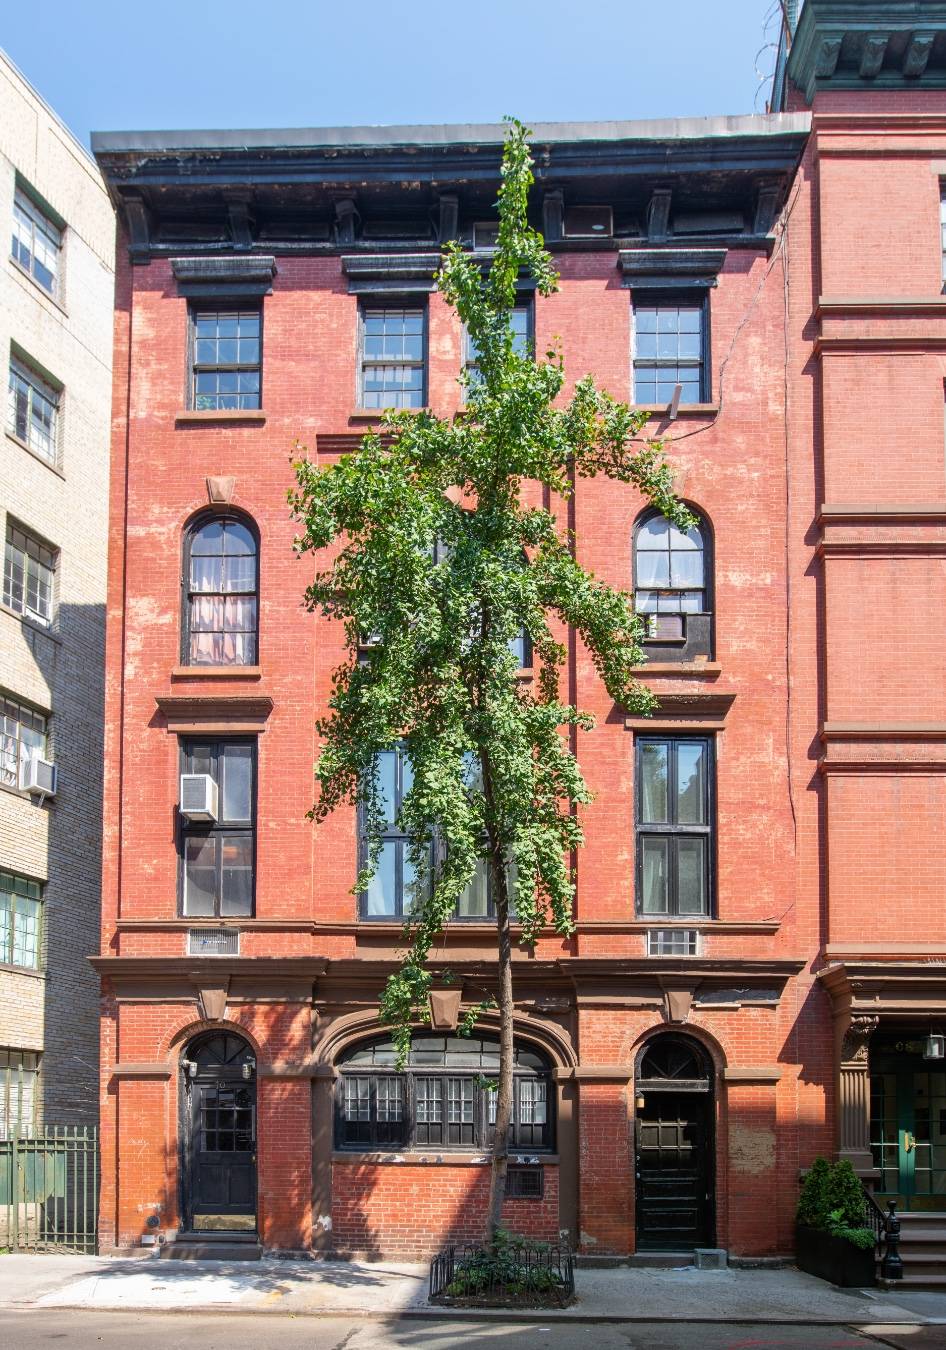 WEST VILLAGE. Check out our gorgeous new apartment at 70 Barrow Street, right where Commerce and Barrow Streets meet ; one of the most picturesque corners of the West Village.